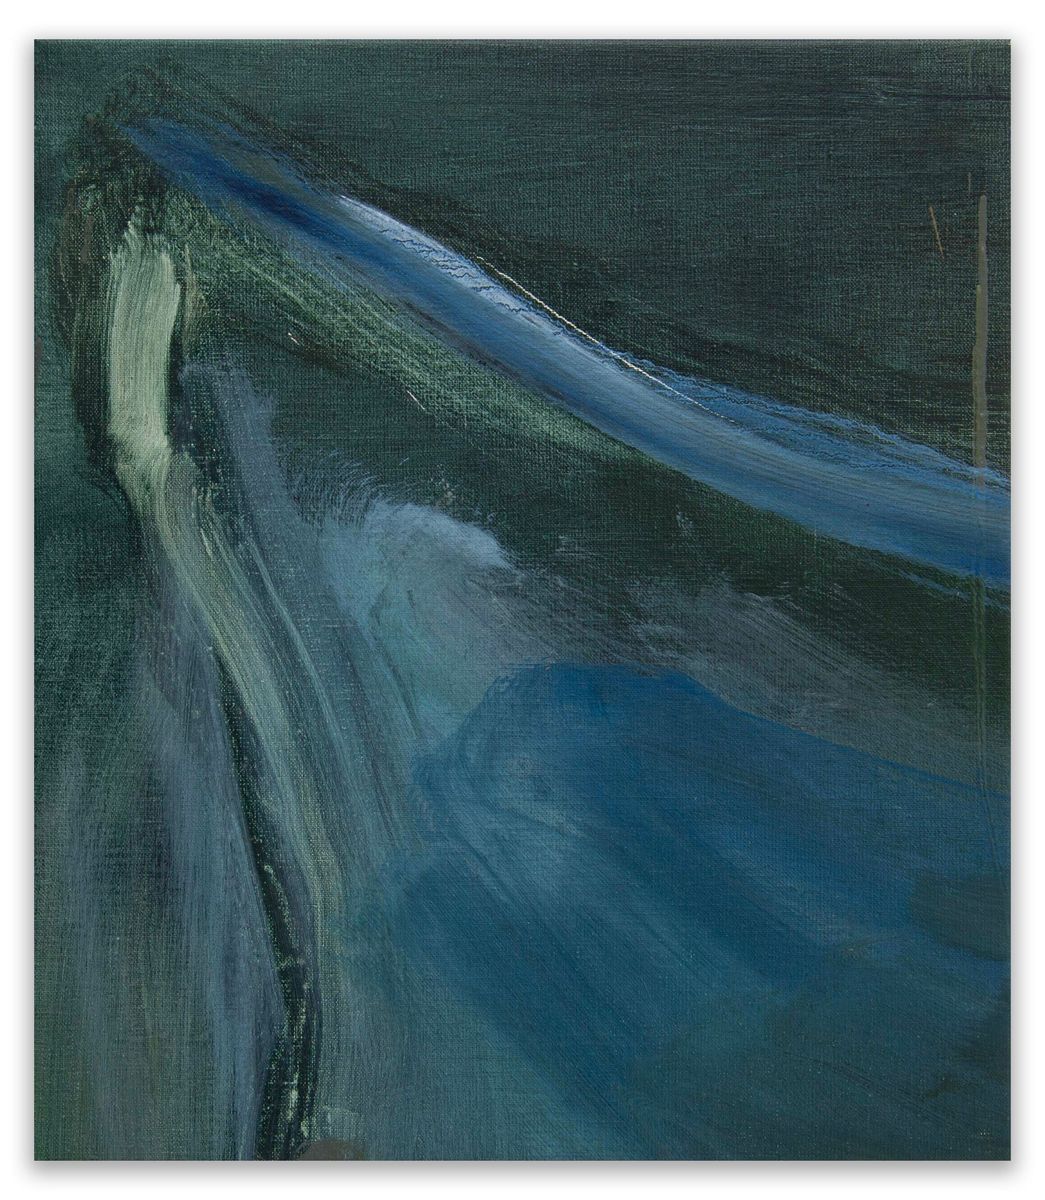 Bridie Gillman - It draped over the pool during winter